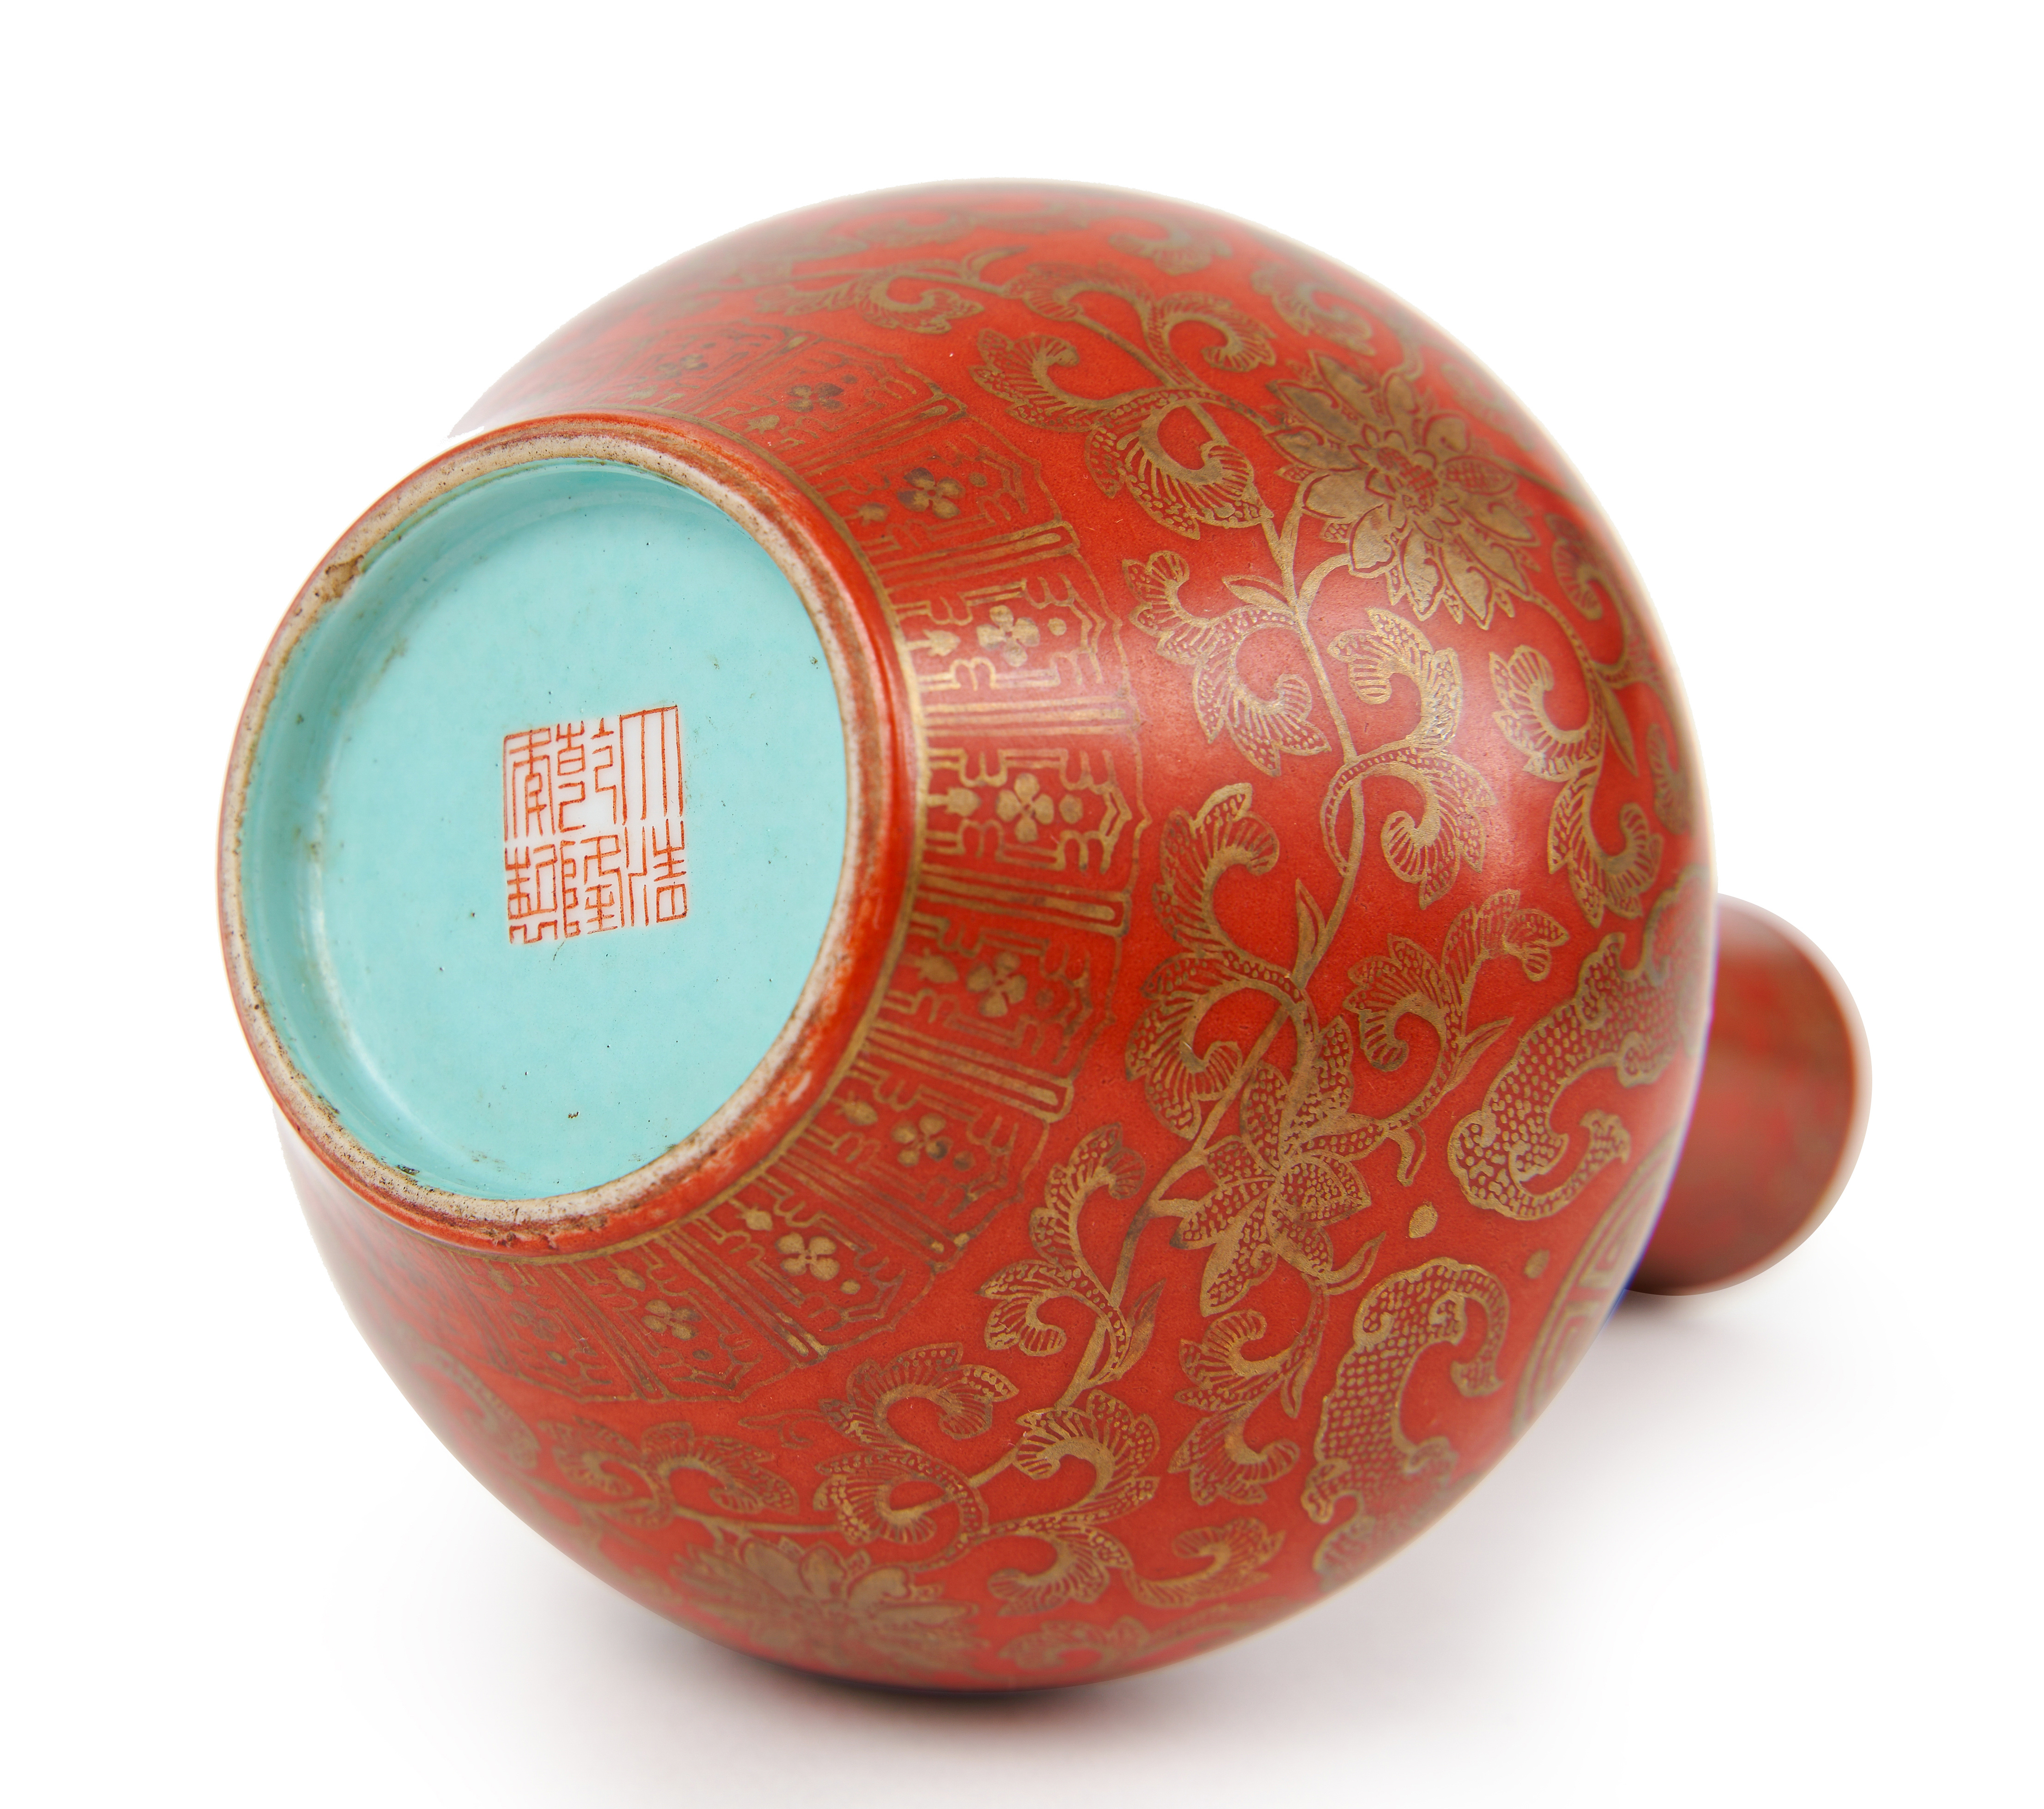 A GILT-DECORATED CORAL-GROUND BOTTLE VASE, QING DYNASTY (1644-1911) - Image 5 of 5